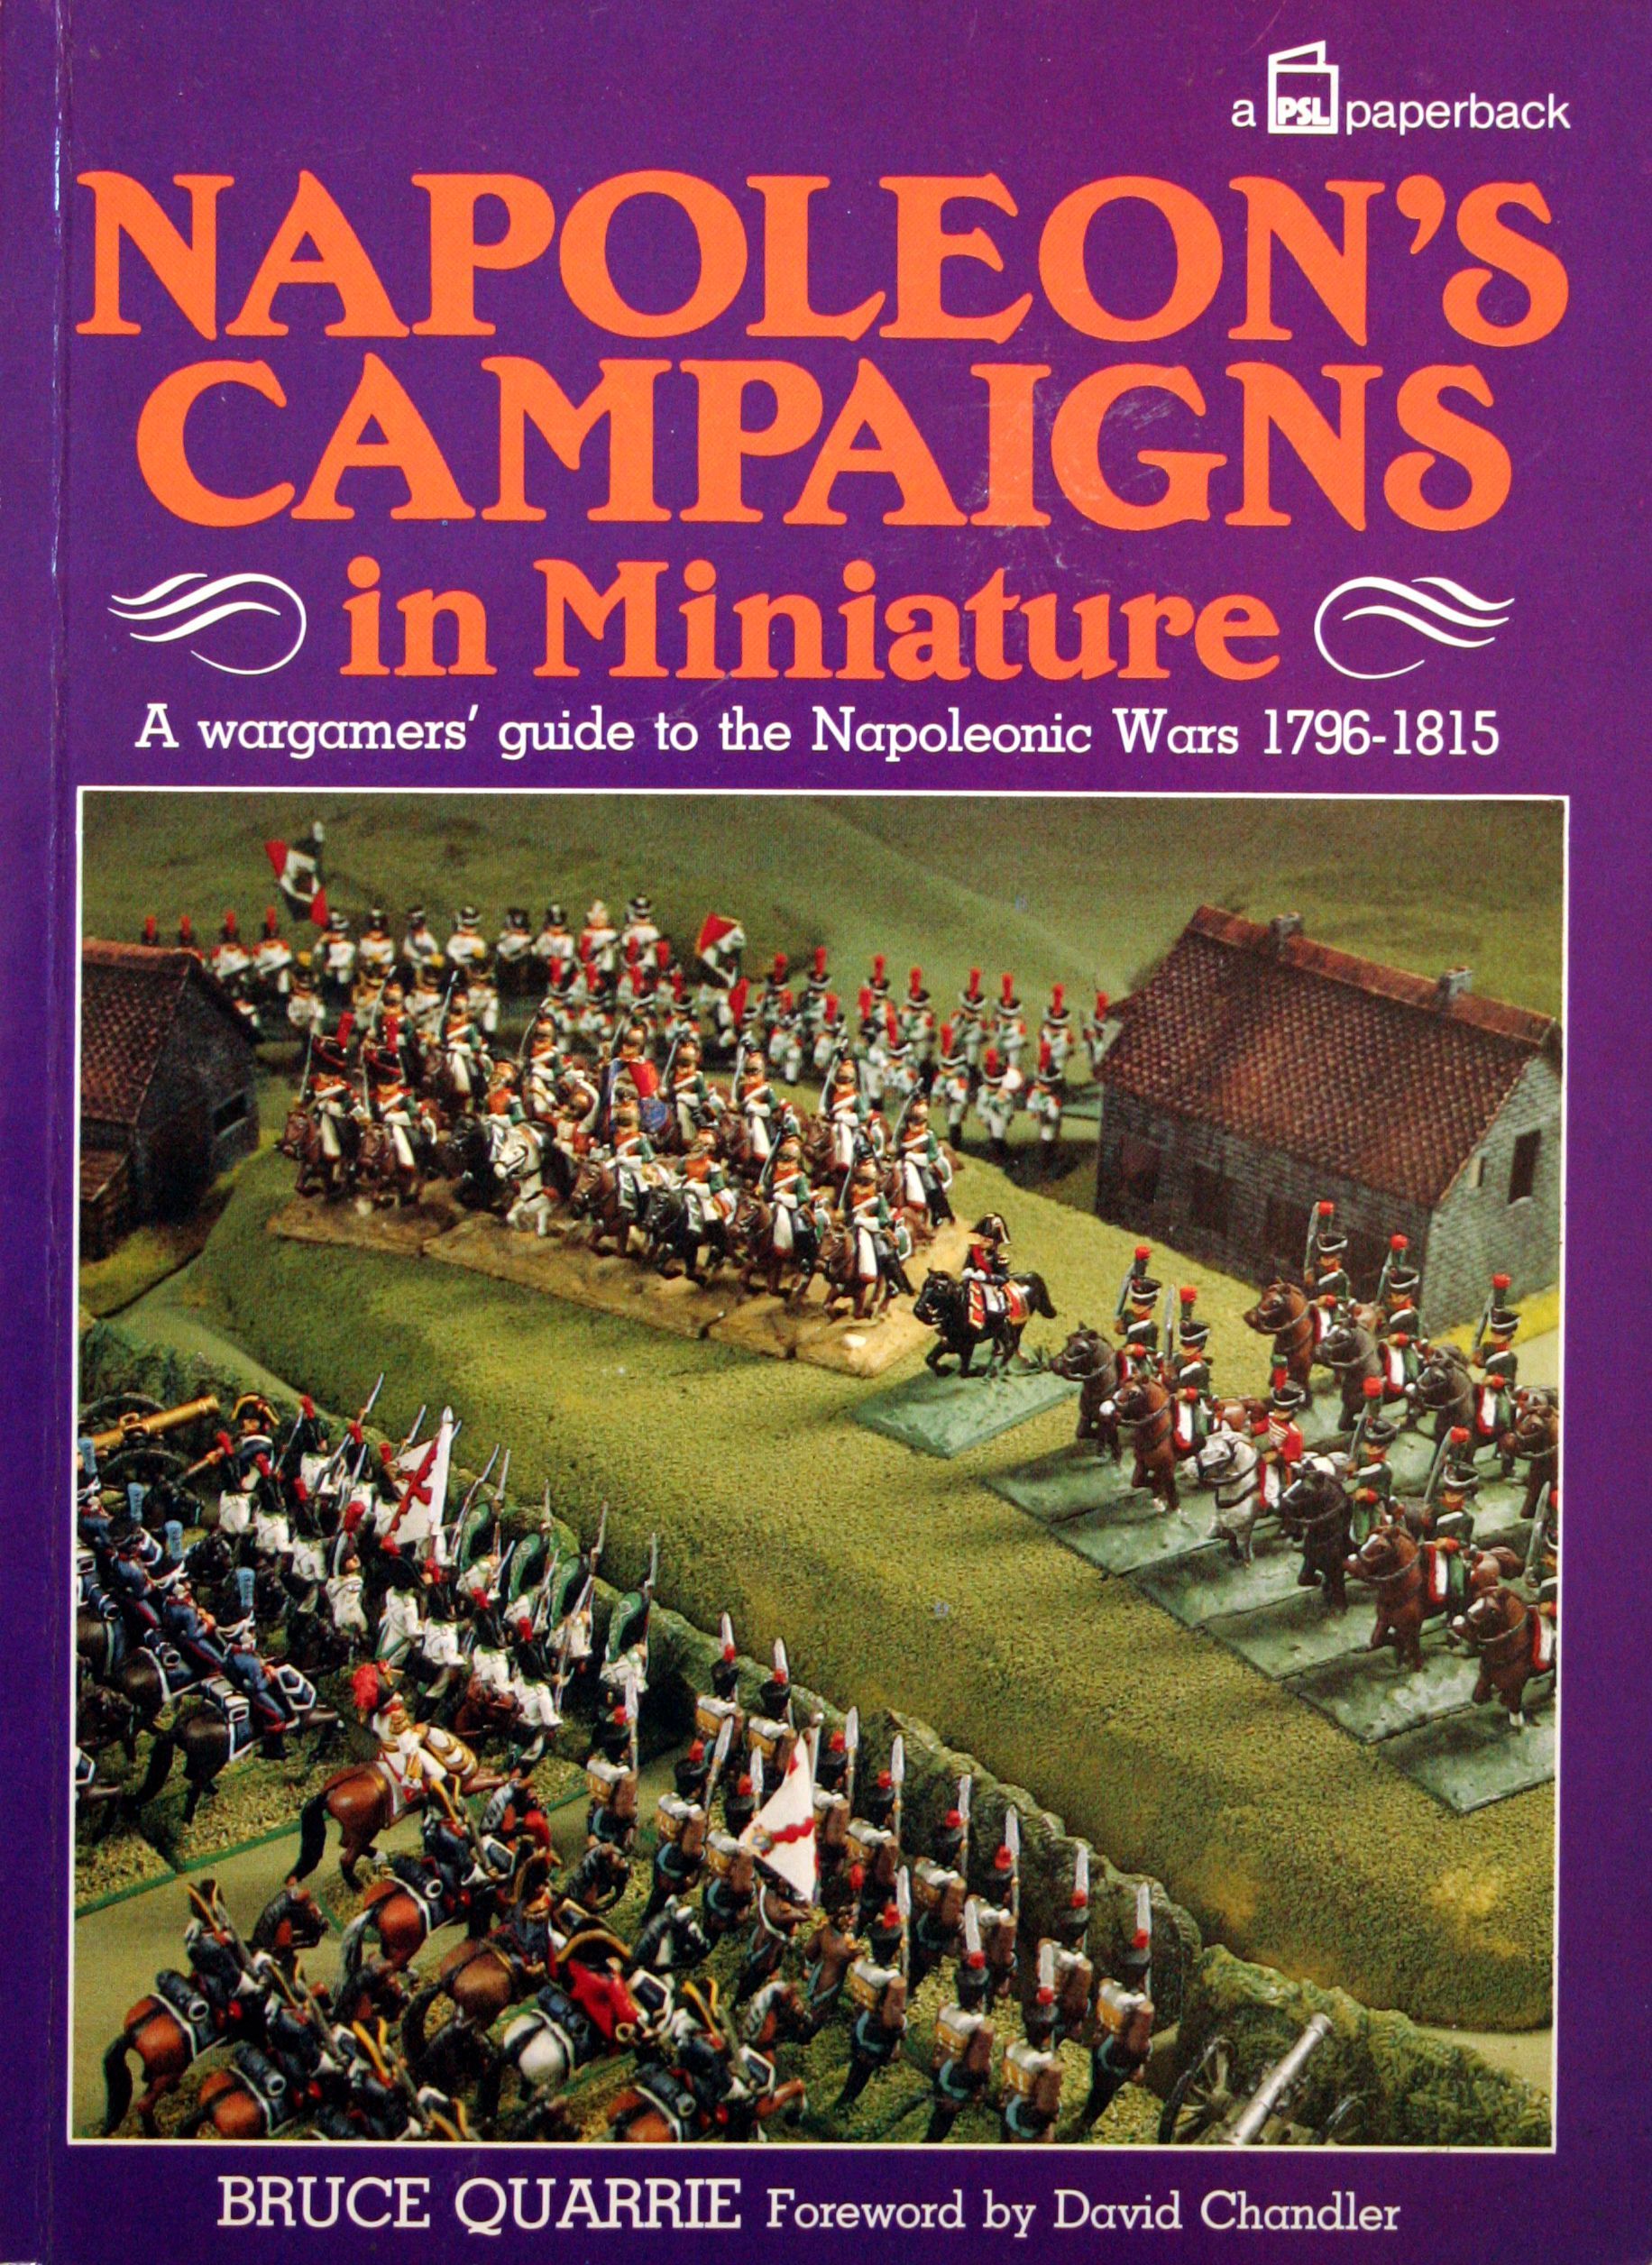 Napoleon's Campaigns in Miniature: A wargamer's guide to the Napoleonic Wars 1796-1815